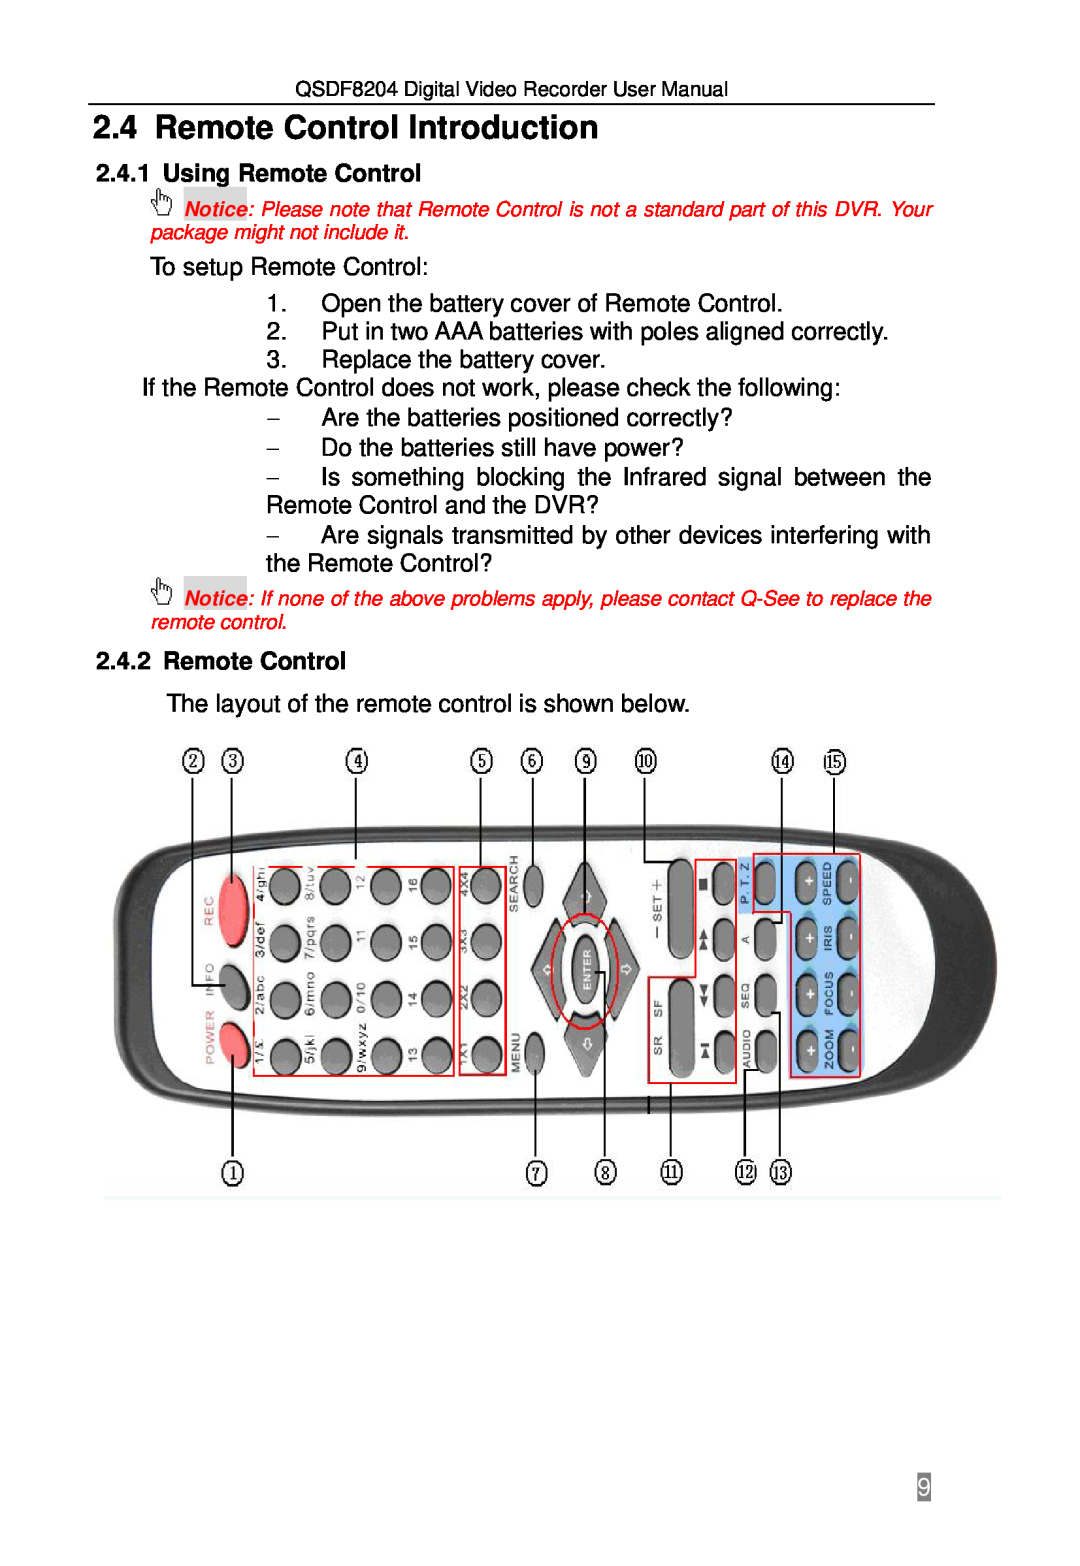 Q-See QSDF8204 user manual 2.4Remote Control Introduction, 2.4.1Using Remote Control 